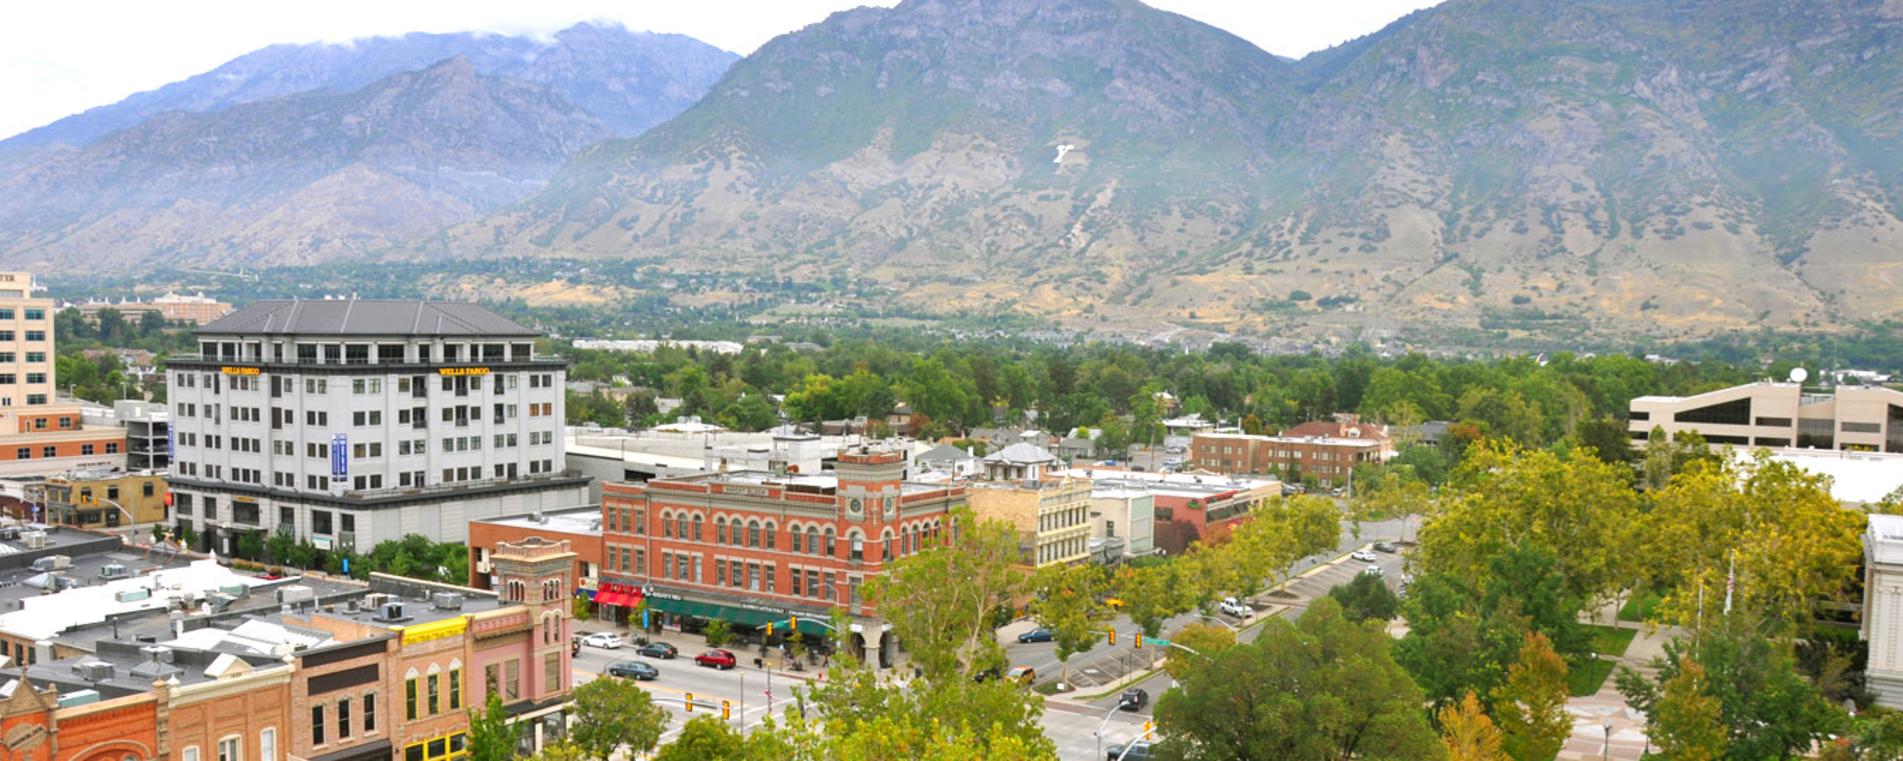 How to Have a Downtown Provo Wedding Explore Utah Valley